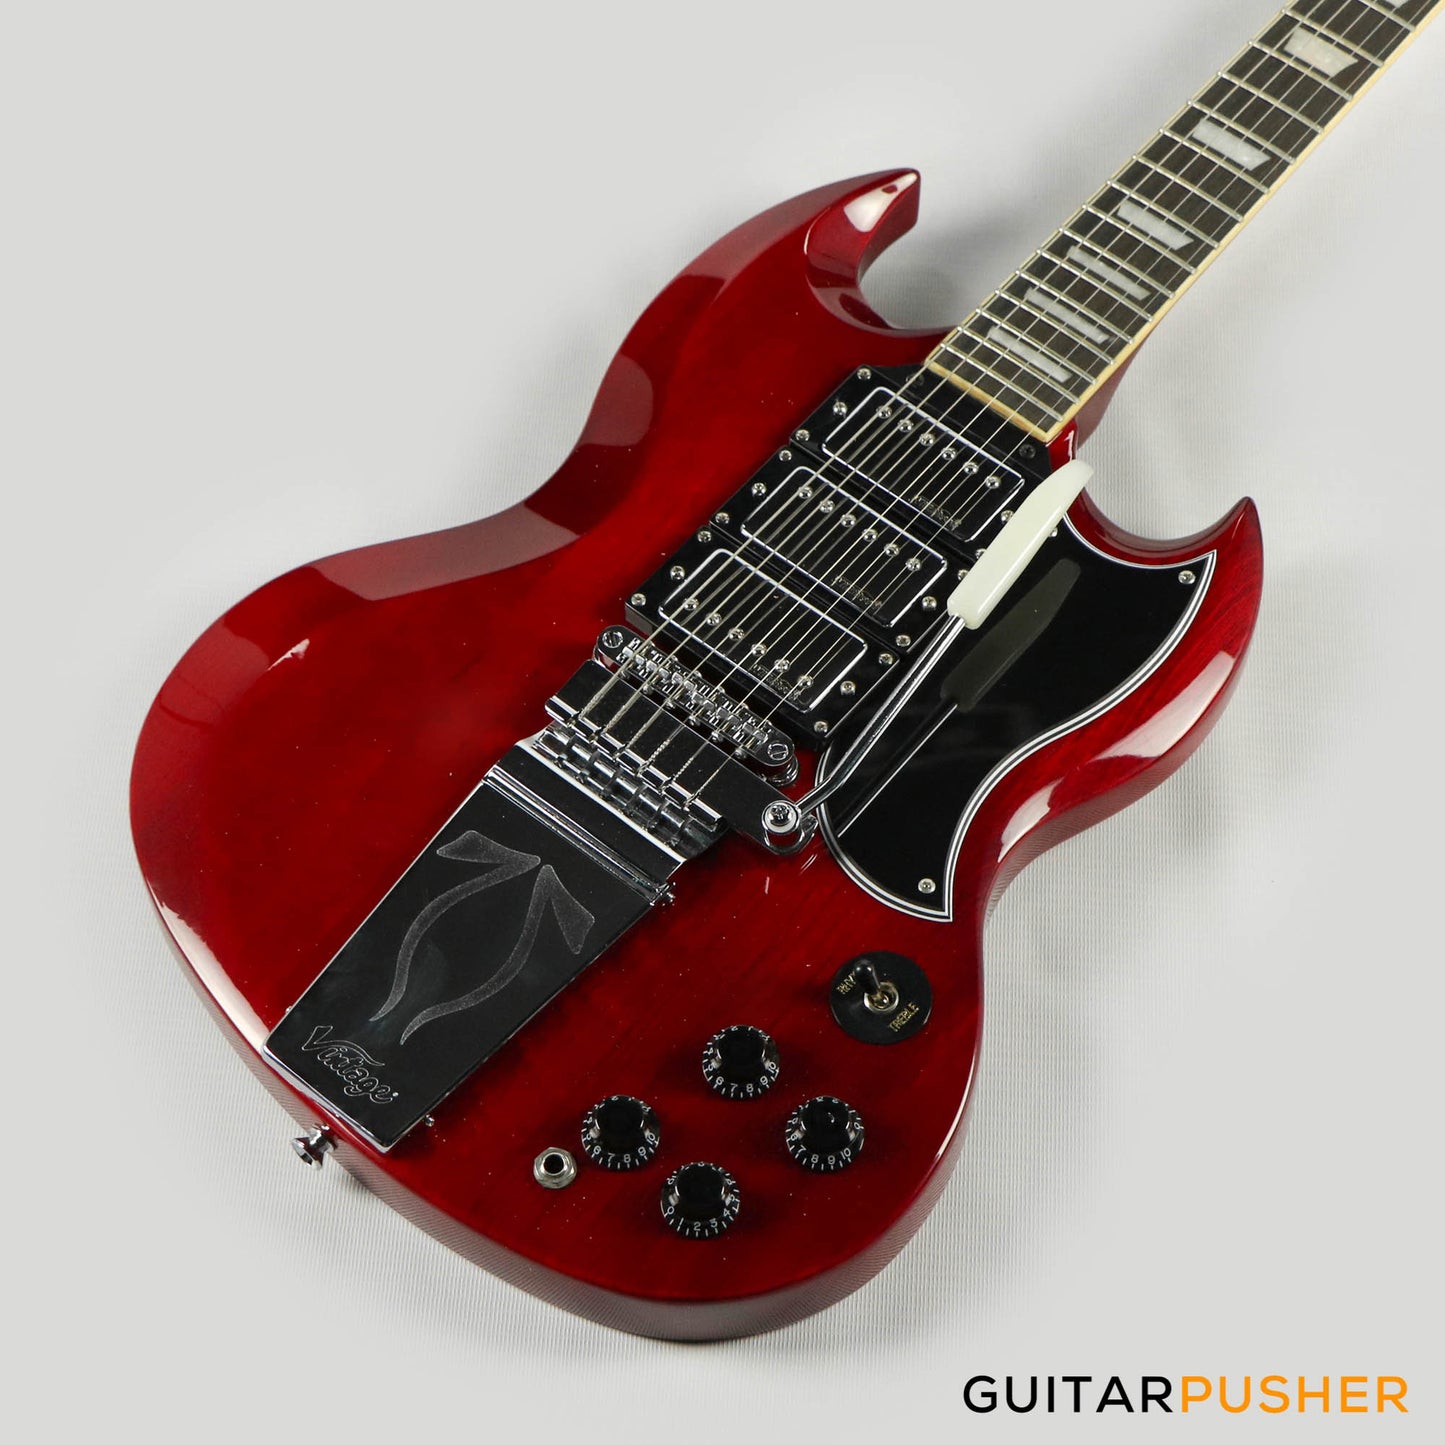 Vintage VS63 Reissue 3-Pickup Vibrola Tailpiece SG Electric Guitar - Cherry Red